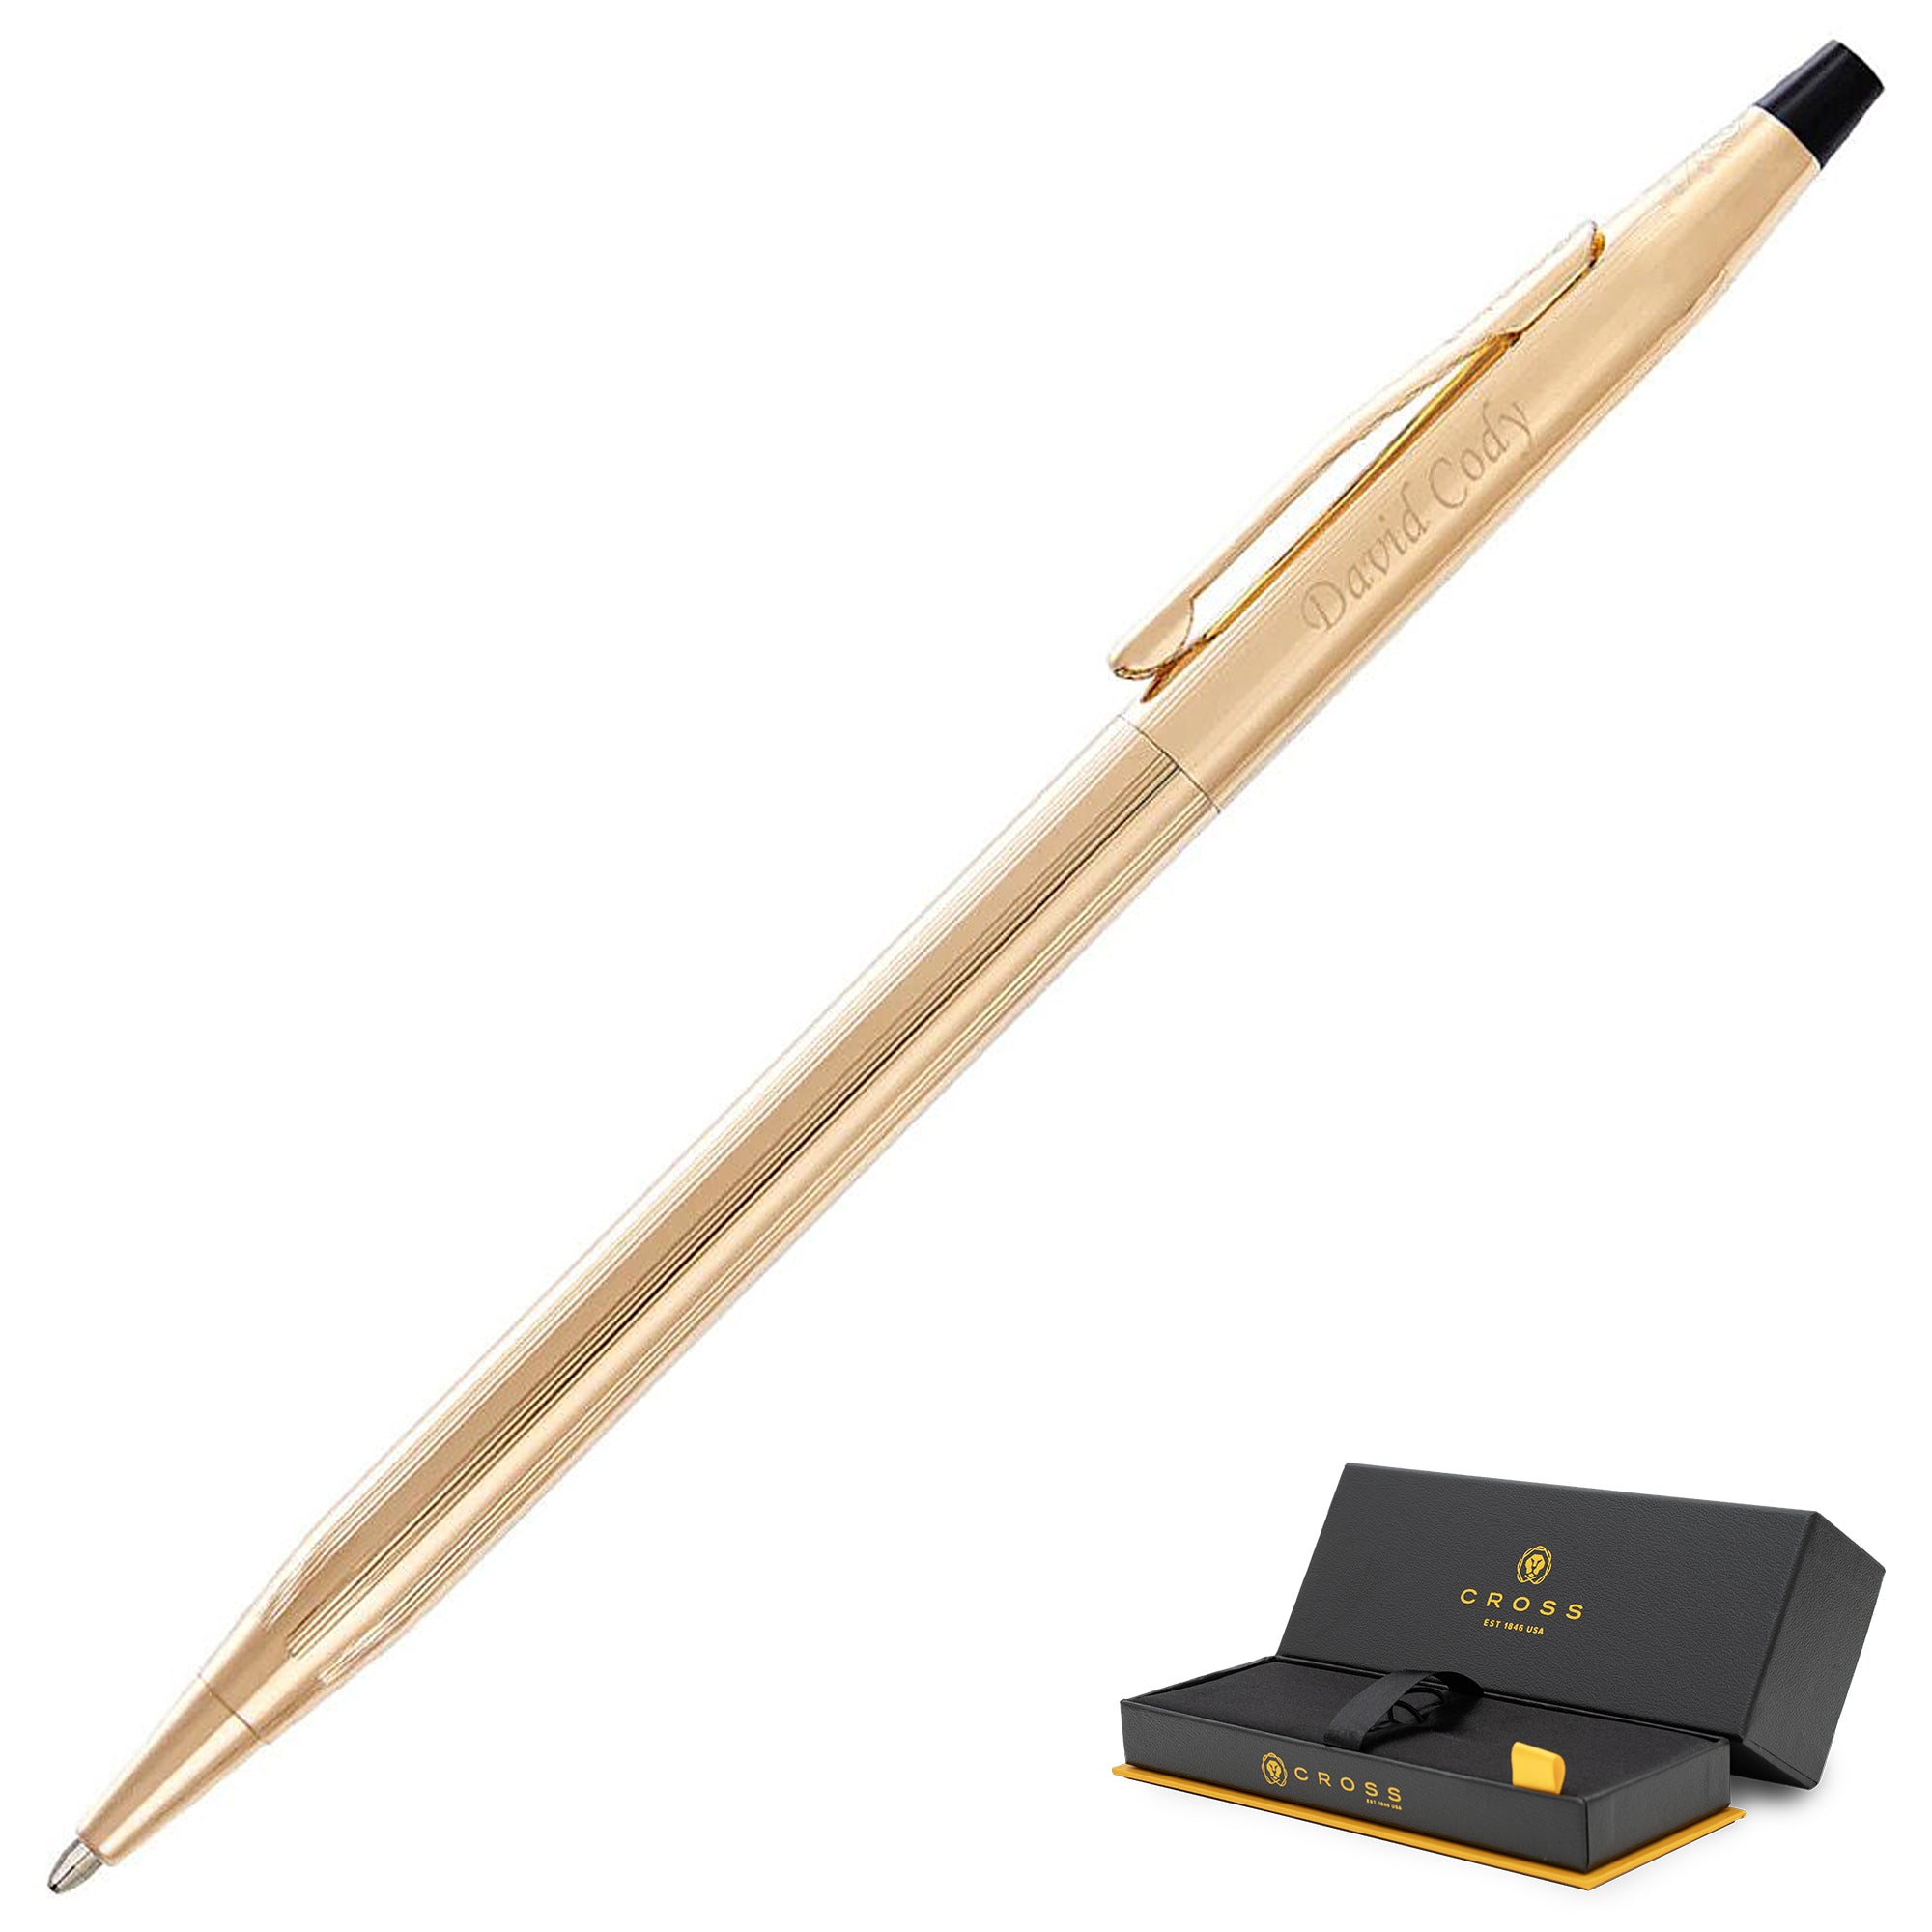 23 Karat Gold Rolled Ballpoint Pen: Luxury and Precision